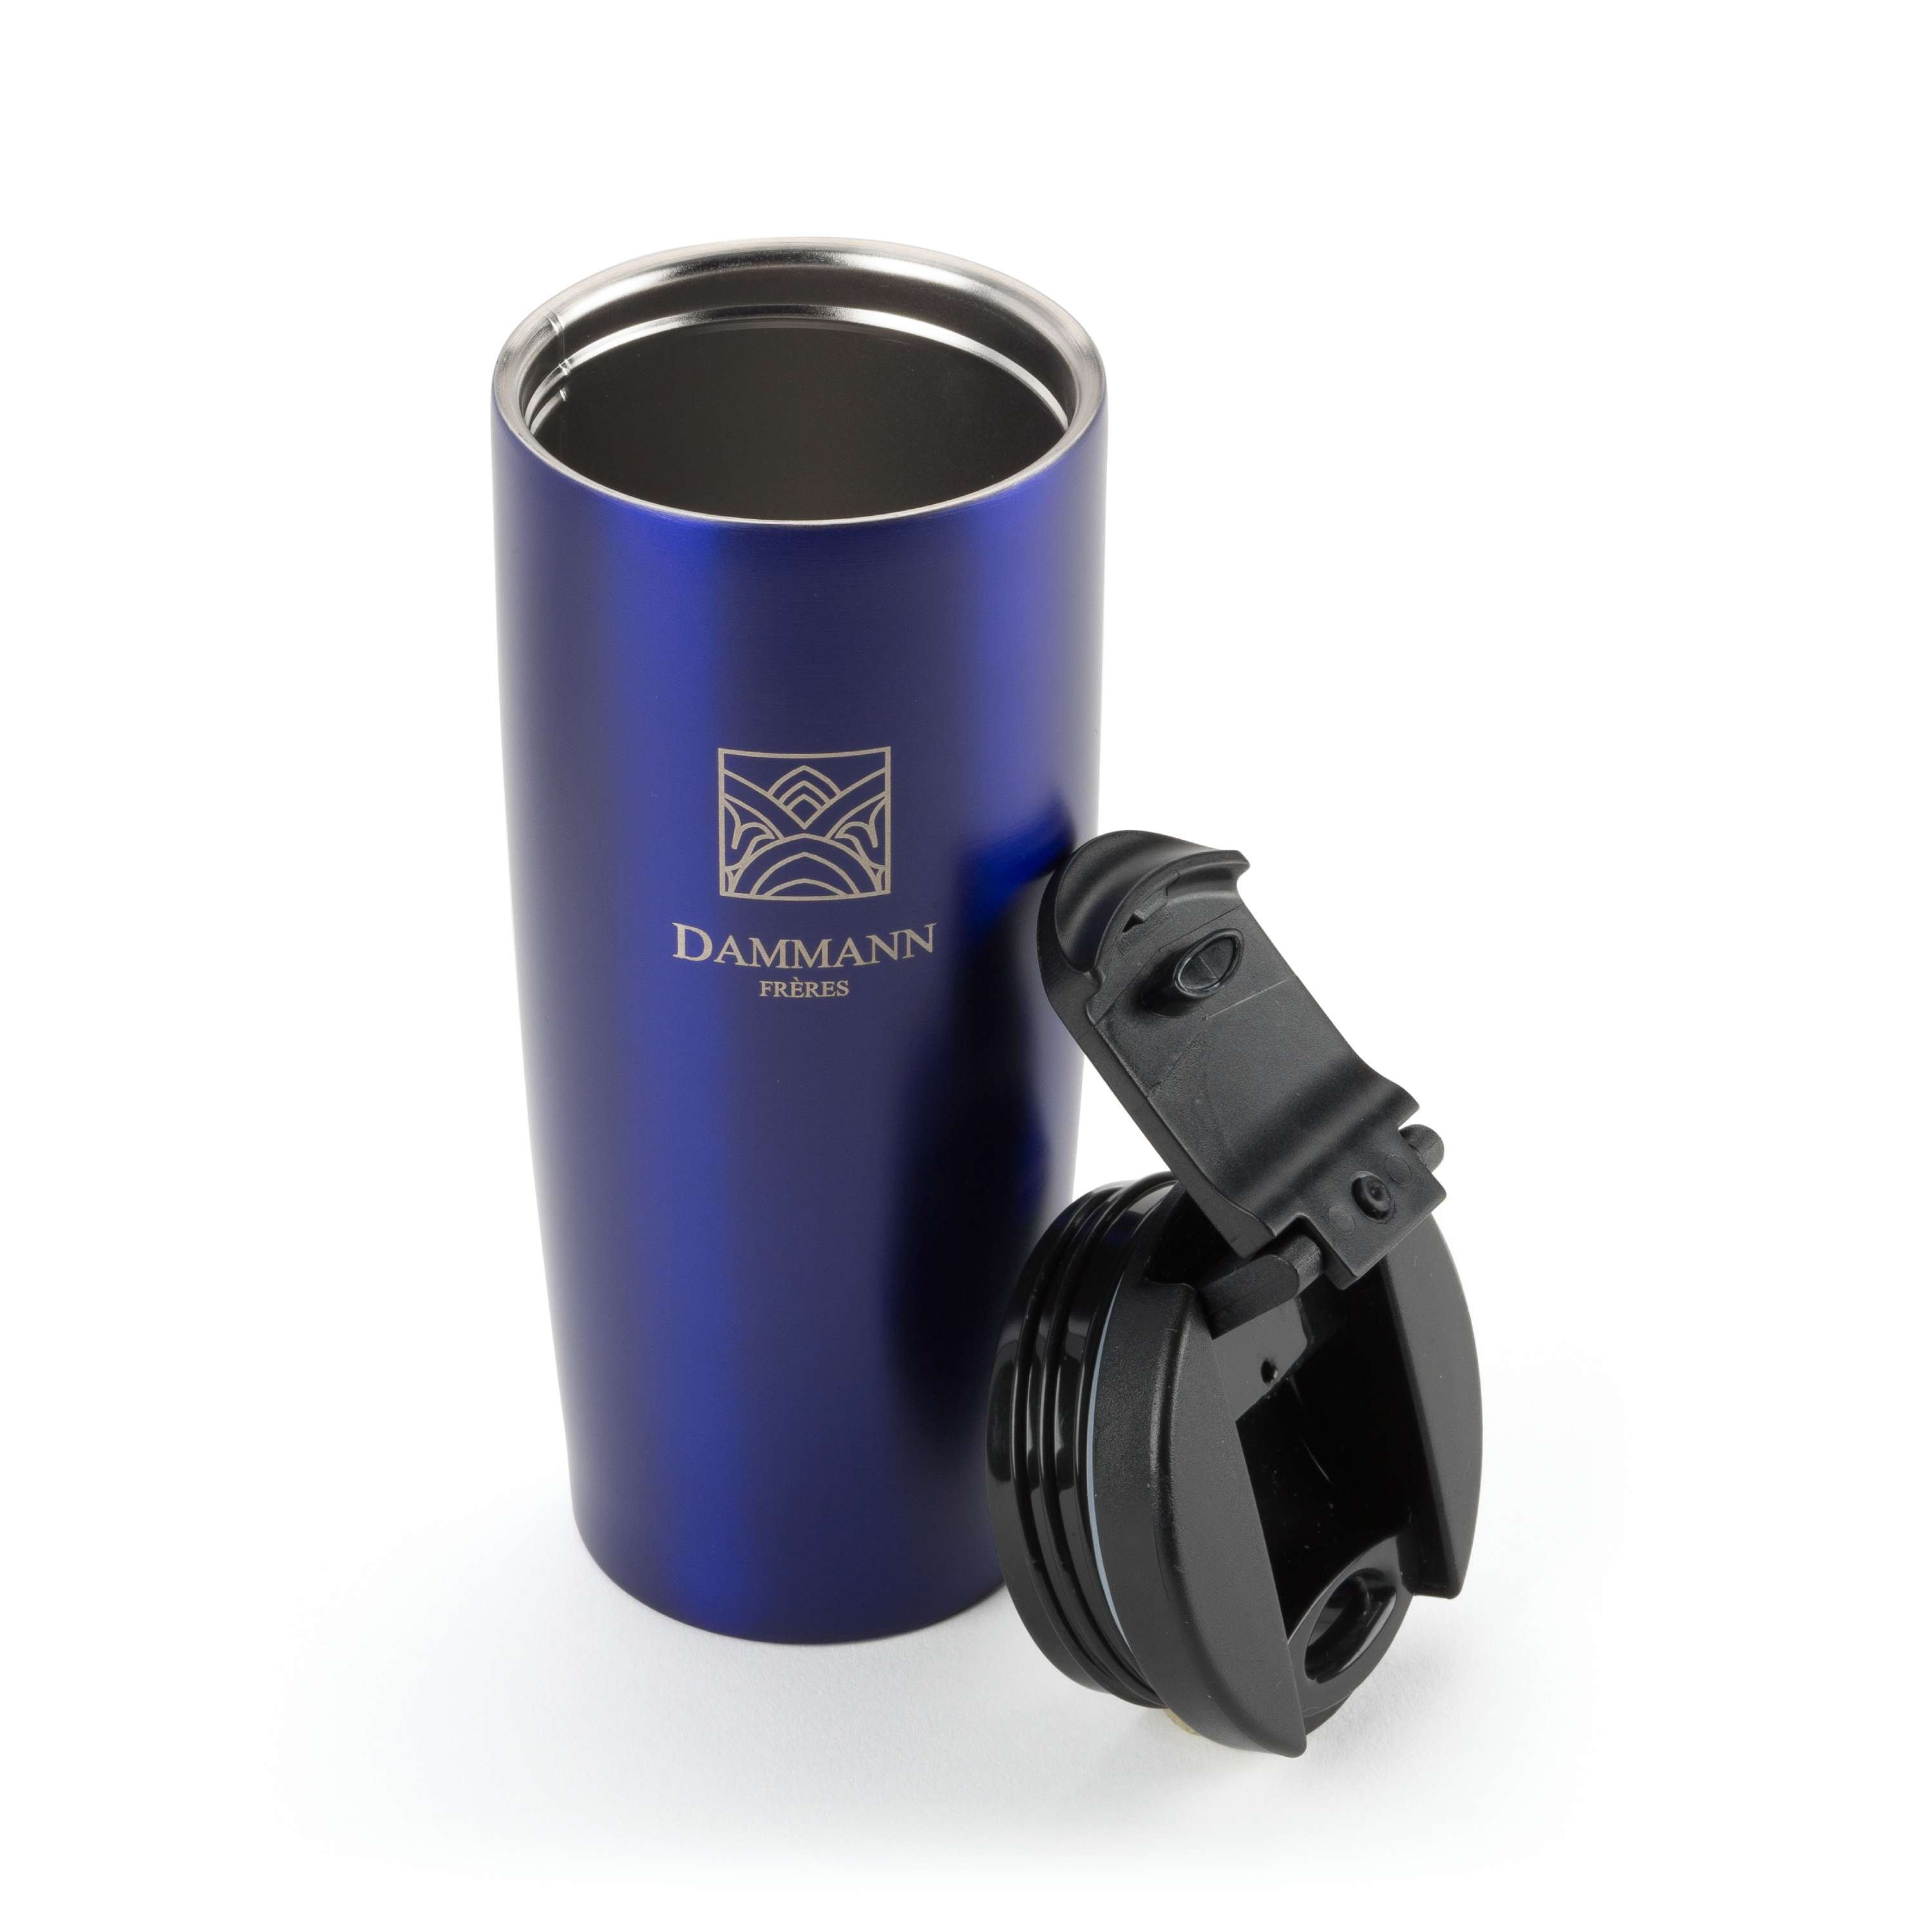 Dammann Frères "Nomade" Isothermal Blue Travel Mug, Caddy / Container, 18-20-9924